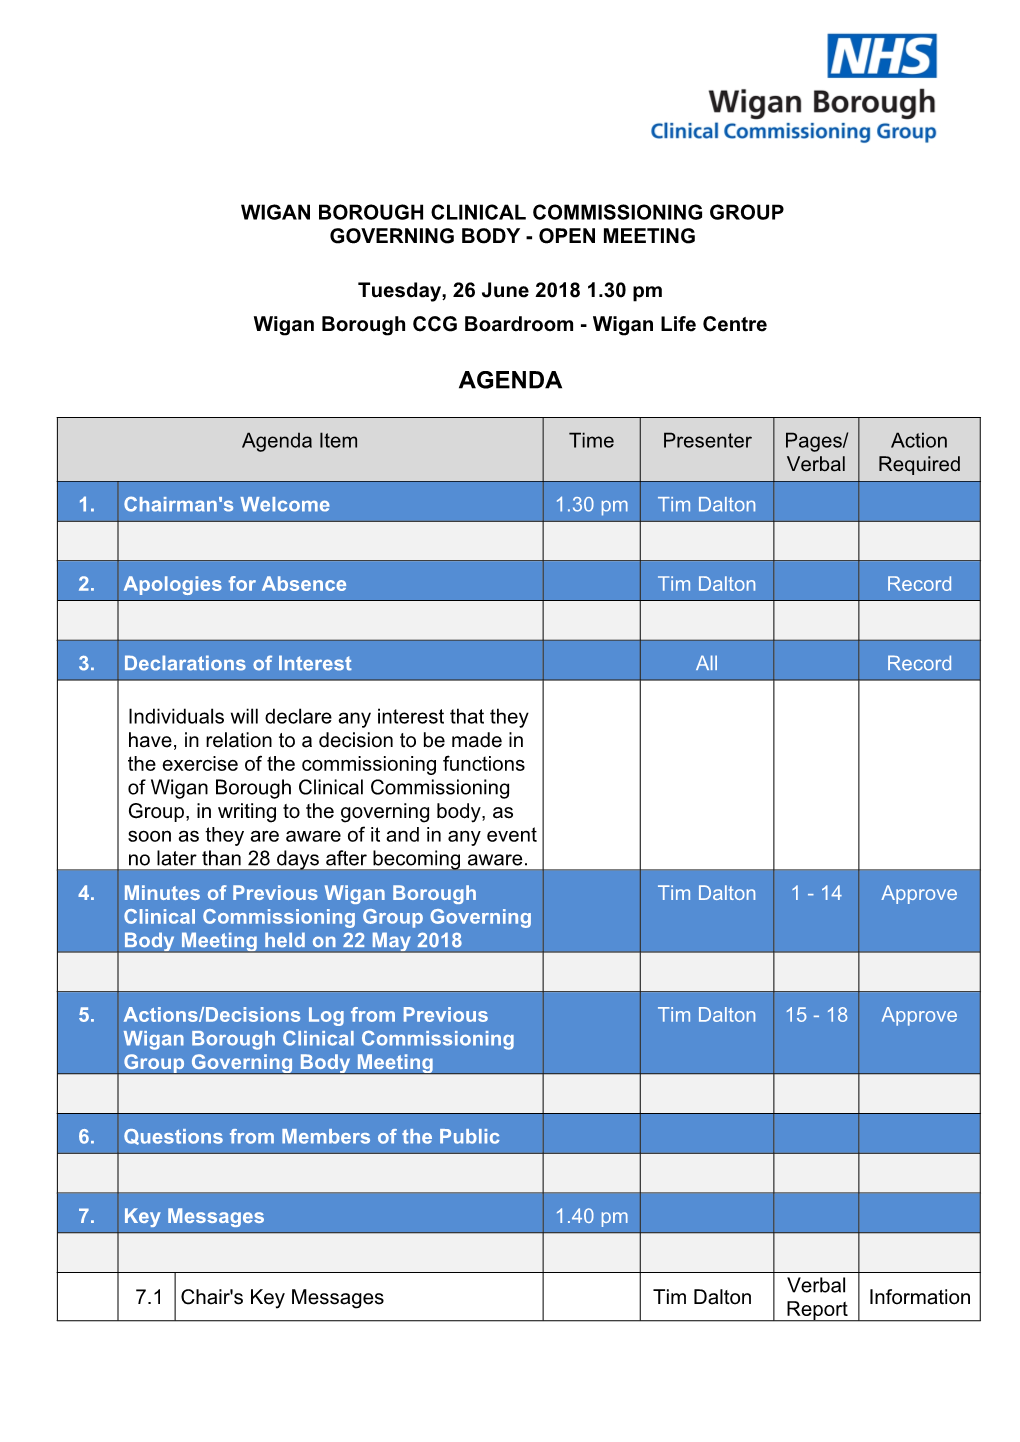 Agenda Document for Wigan Borough Clinical Commissioning Group